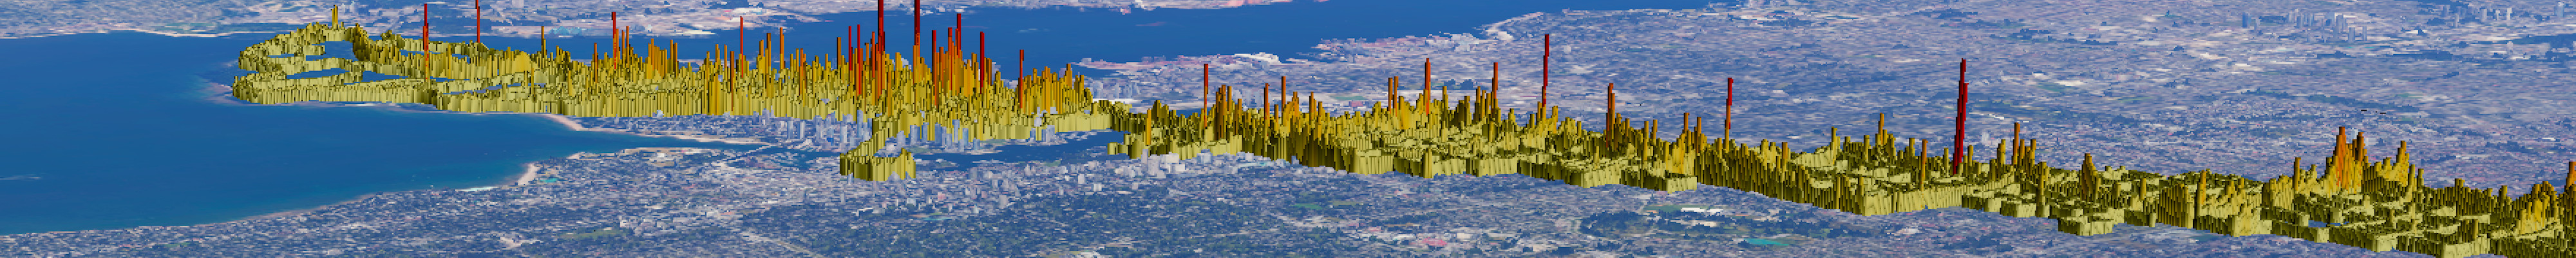 Cutout from  Measured carbon dioxide concentrations in Vancouver